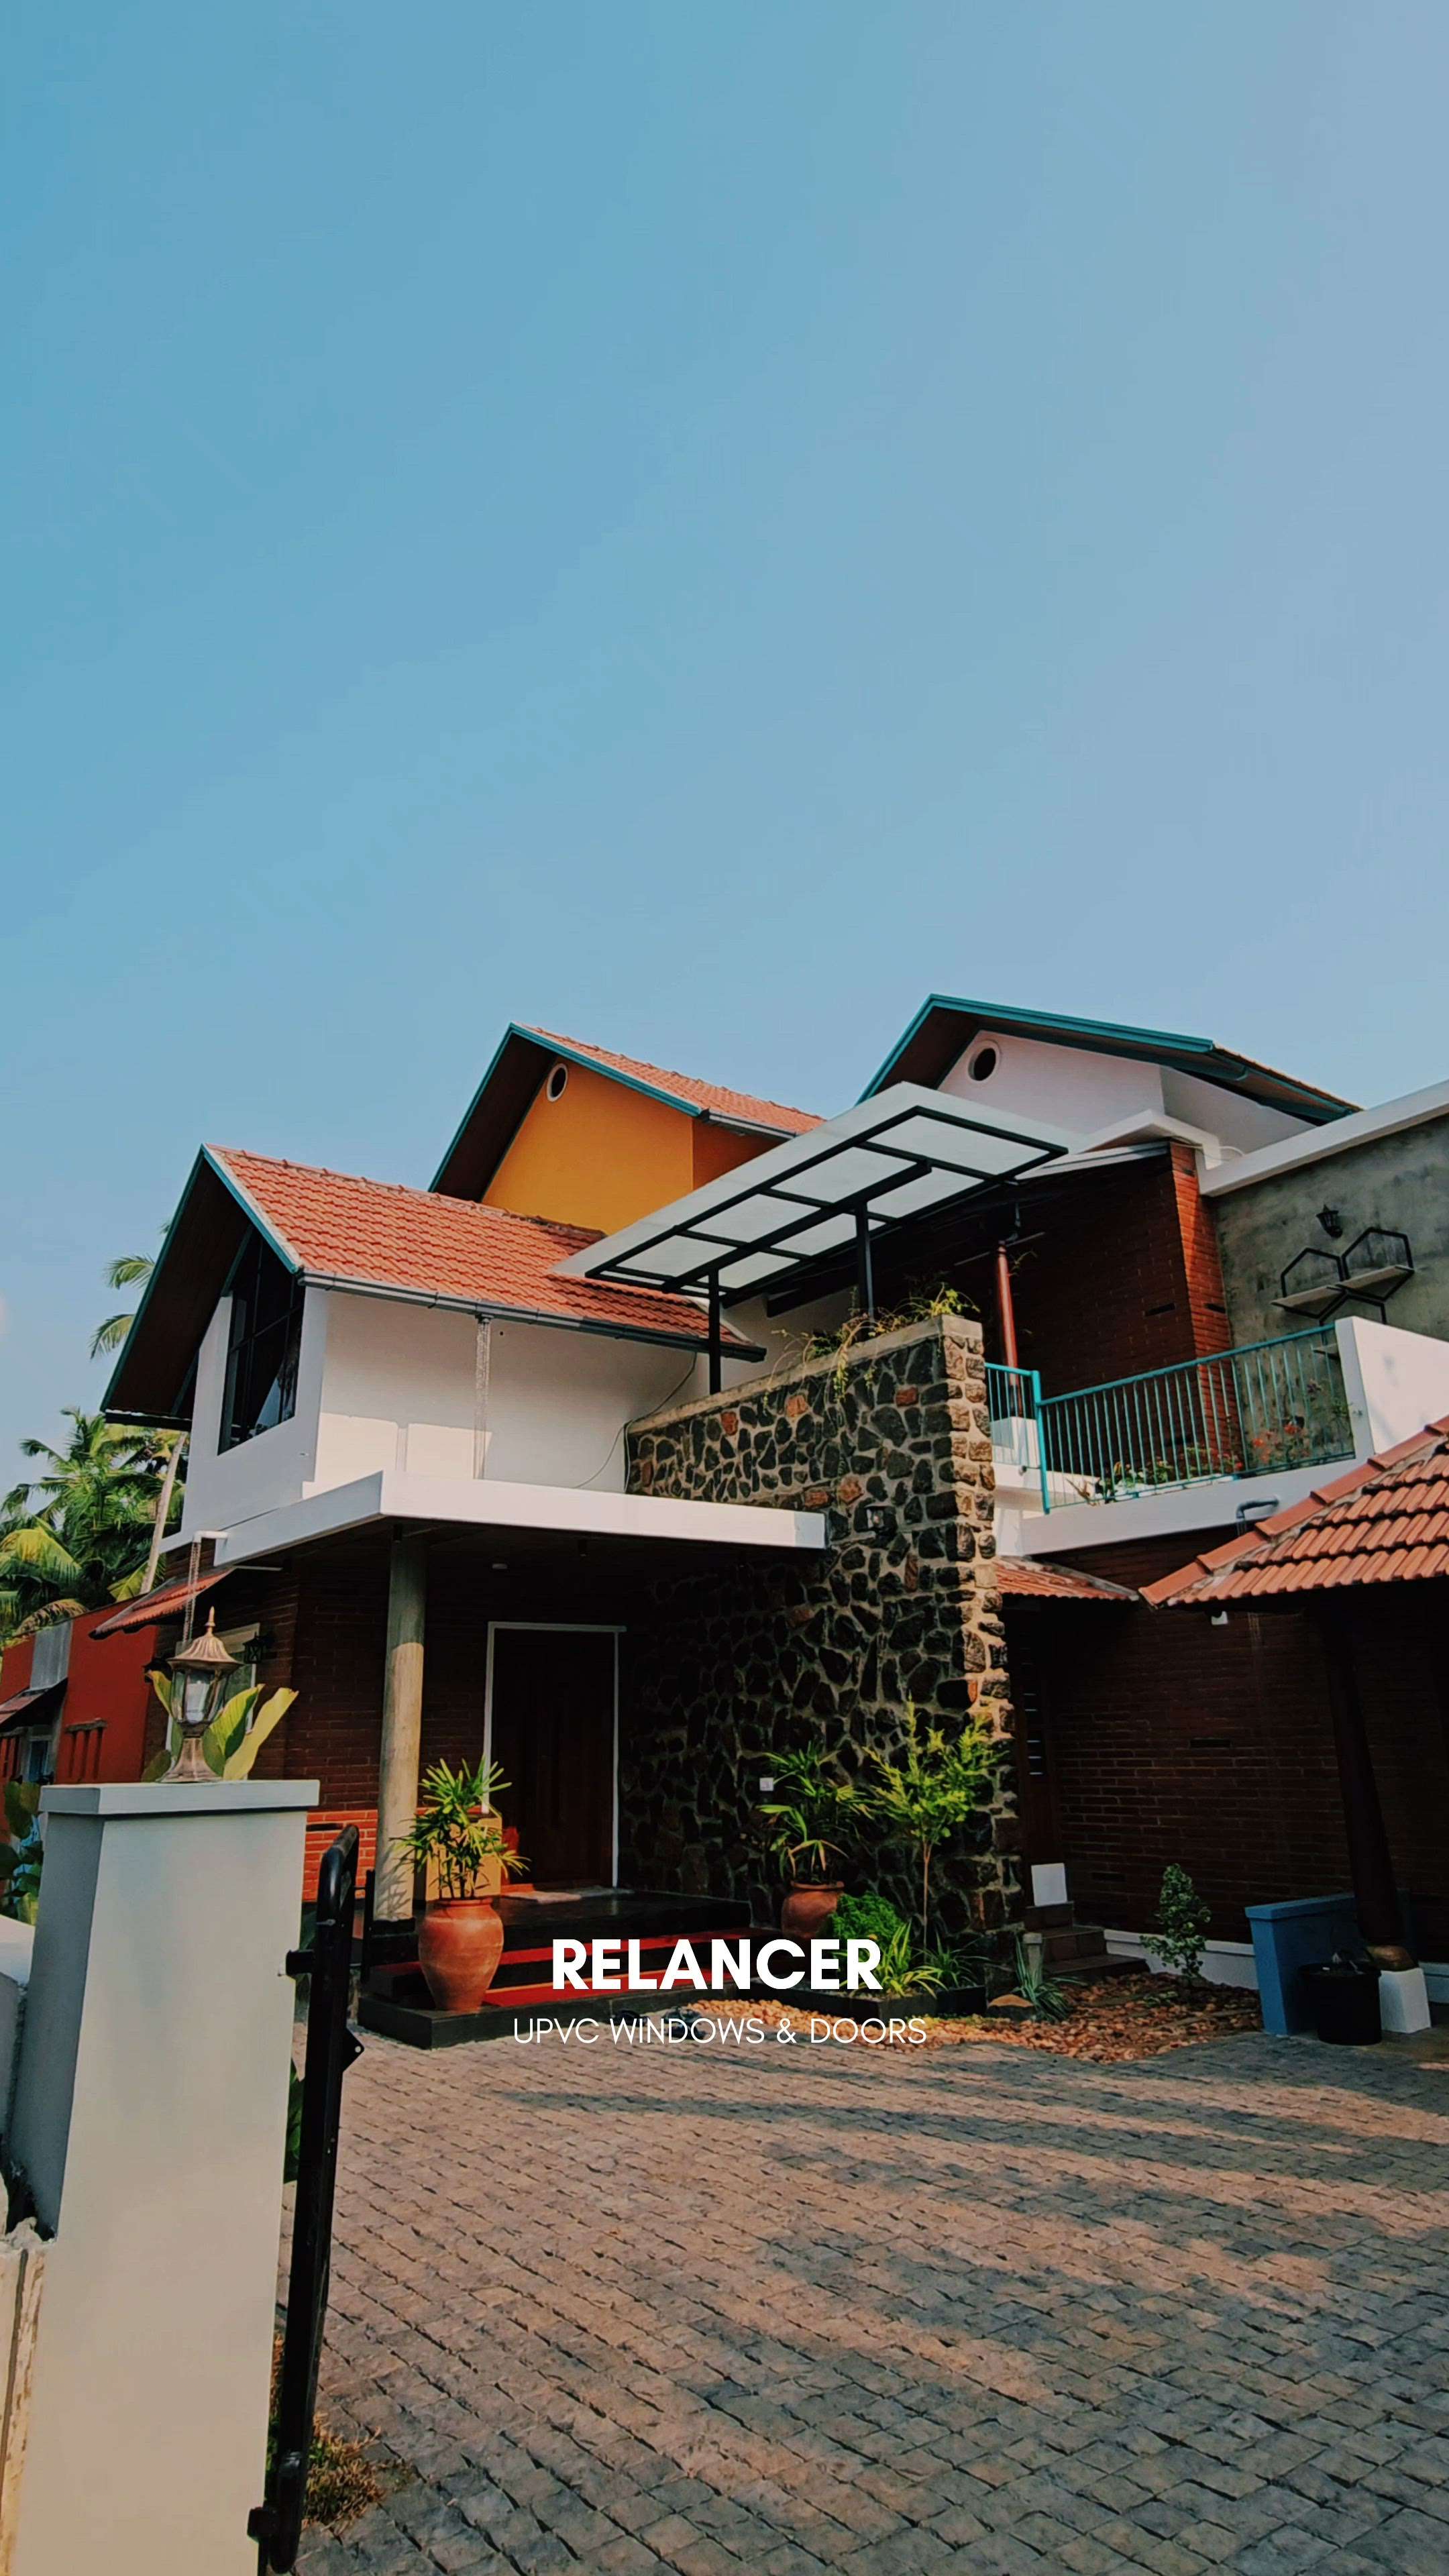 From concept to completion, Relancer delivers excellence!!

 #RelancerCraftsmanship #relancer #relancerupvc #relancerupvcdoors
#relancerupvcdoorsandwindows #upvc #upvcdoors #upvcwindows #interiordesignideas #architect #architectkerala